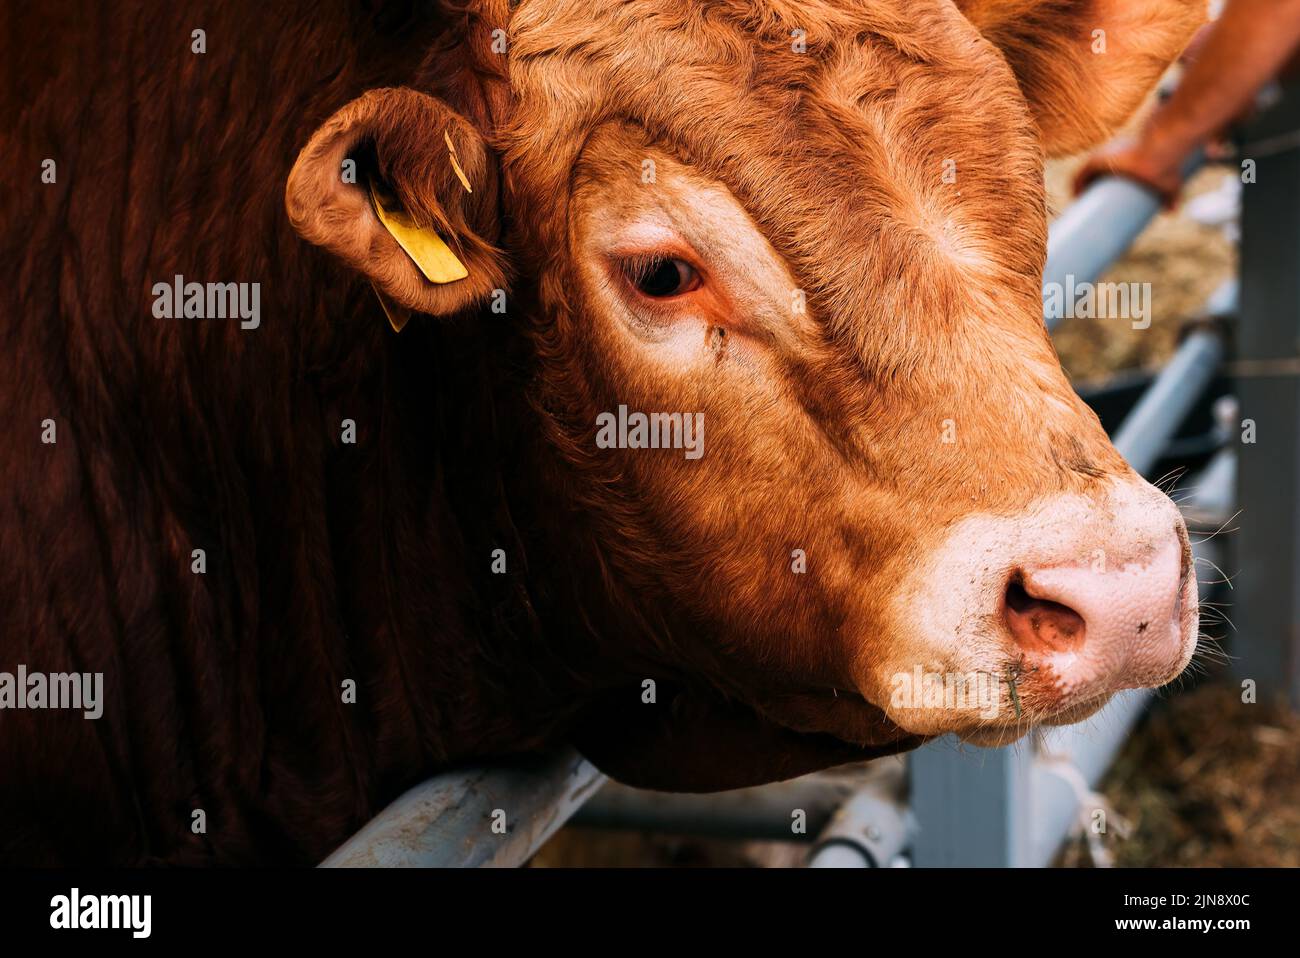 Closeup portrait of limousin bull looking at camera Stock Photo